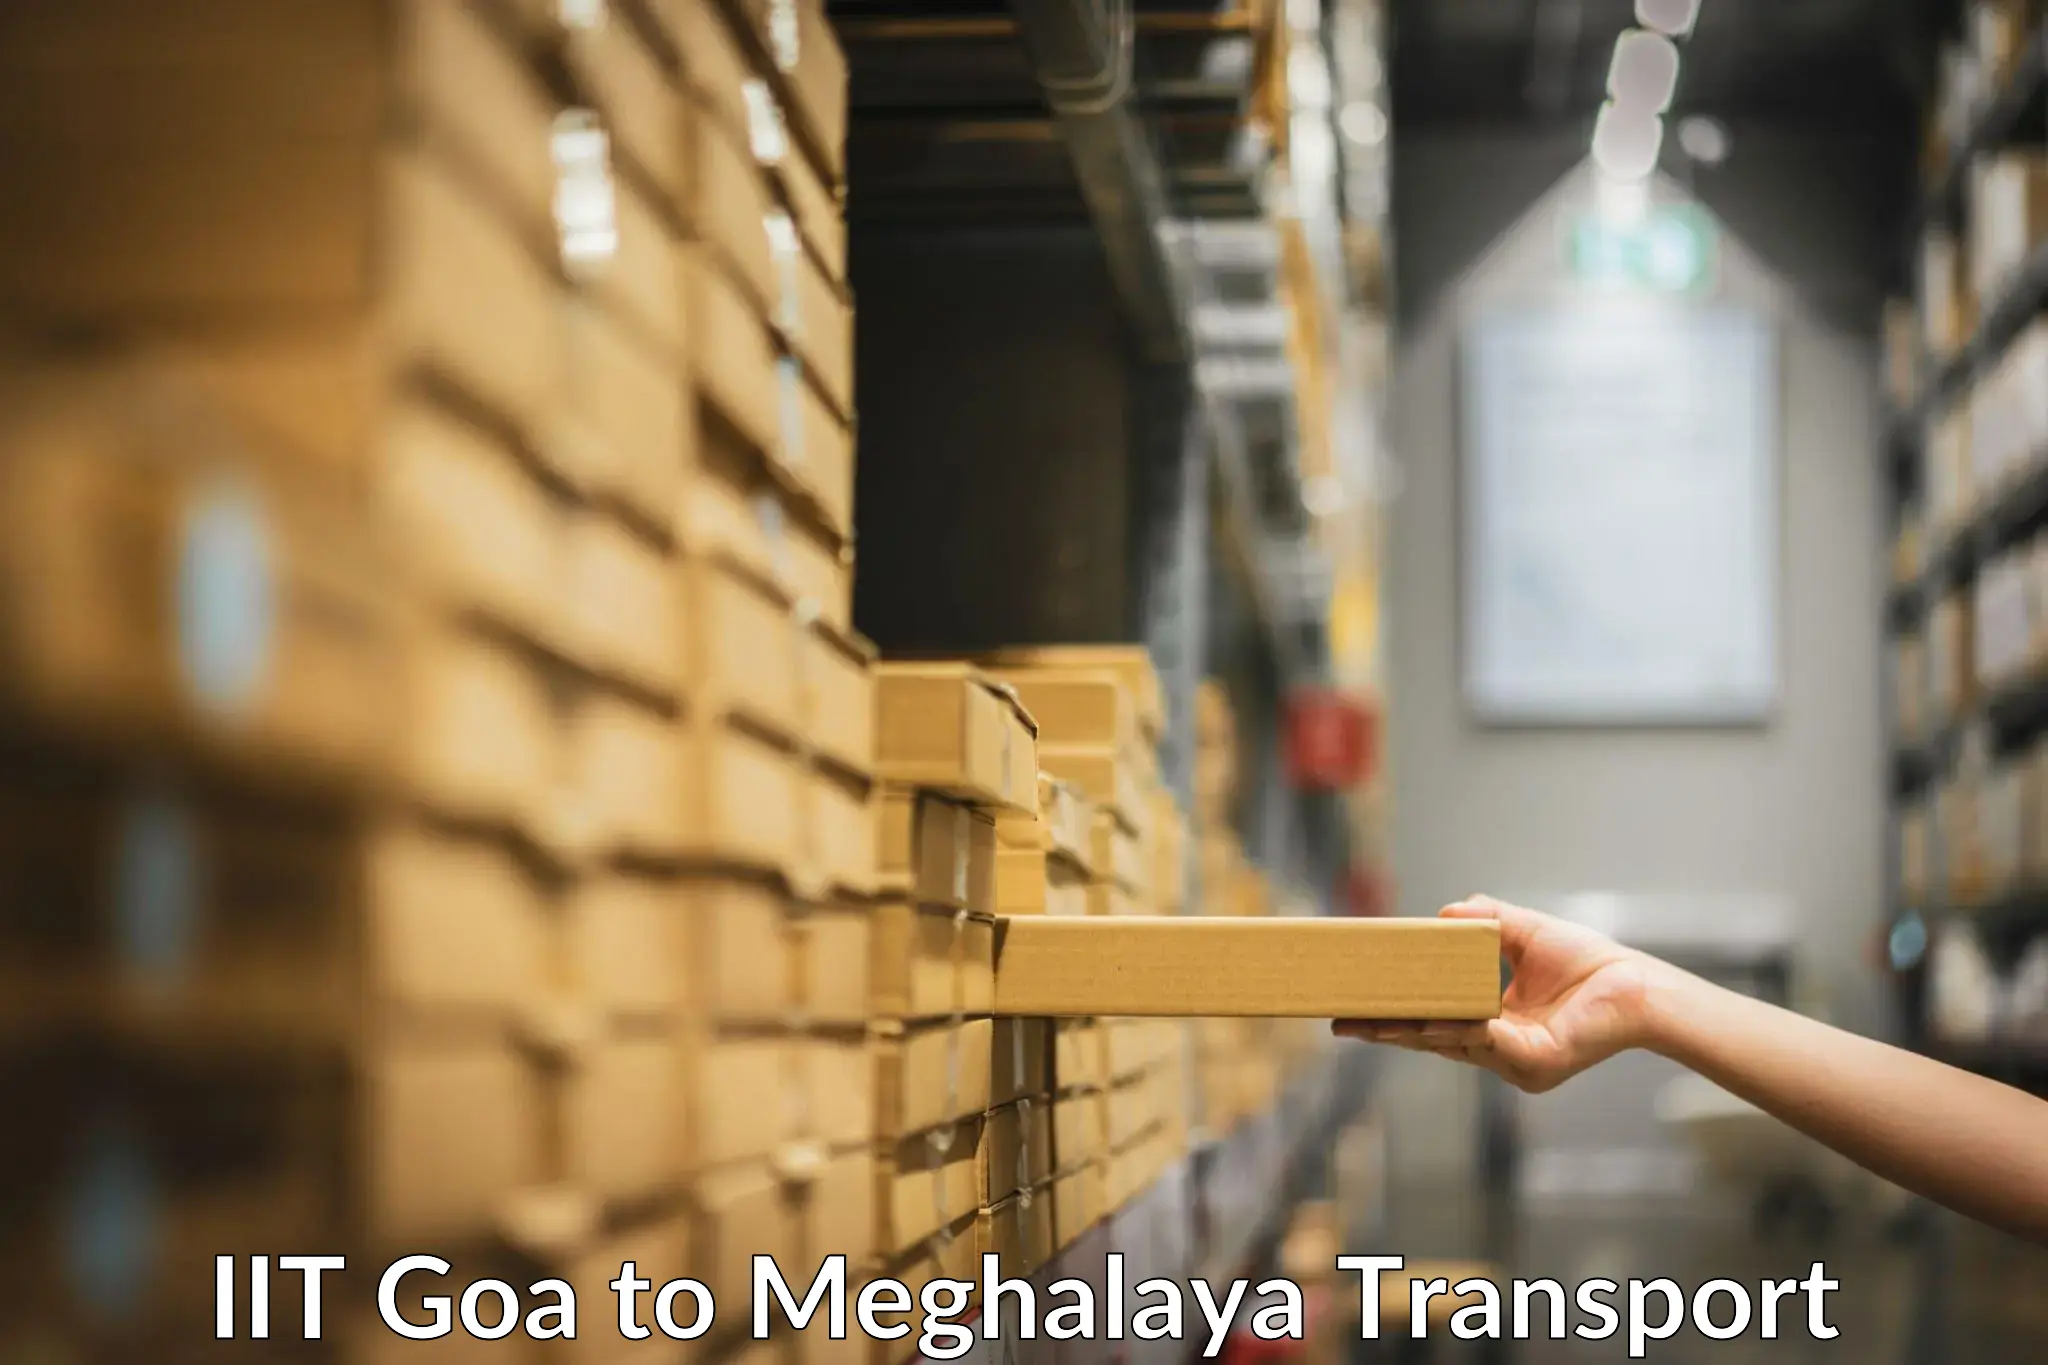 Air freight transport services IIT Goa to Meghalaya